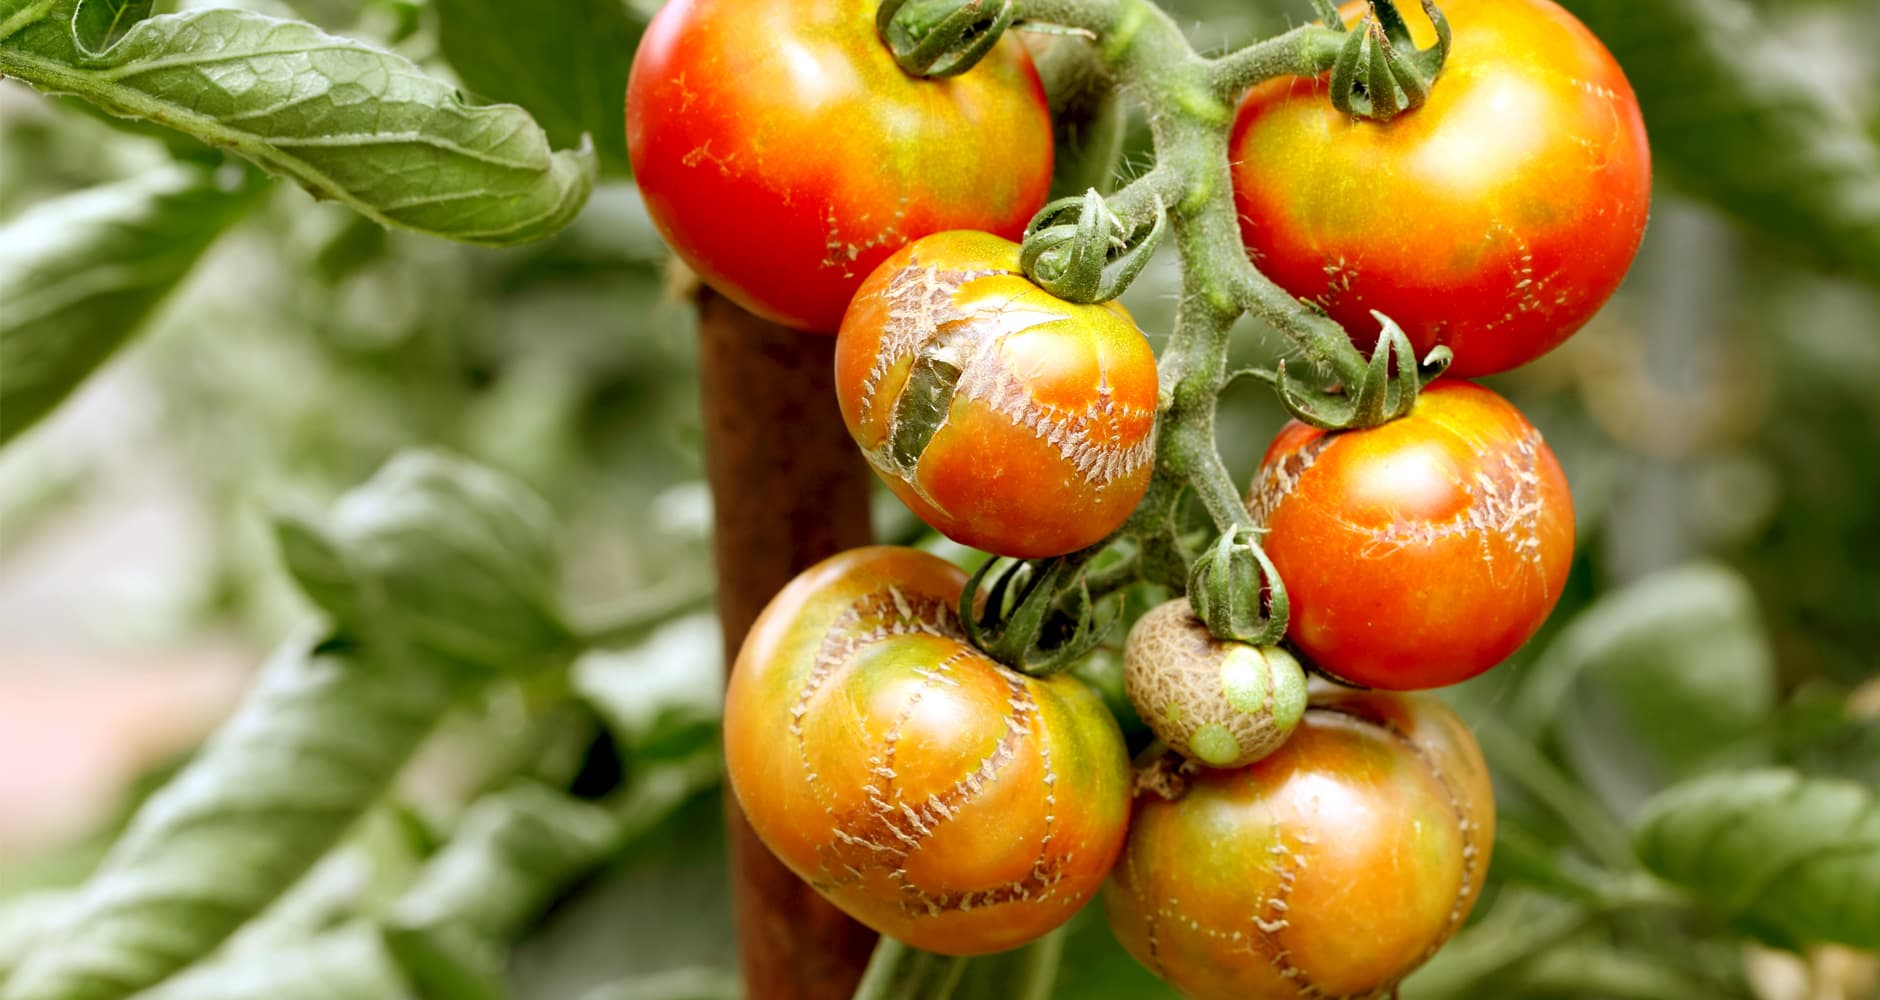 Tomatoes with viral disease.